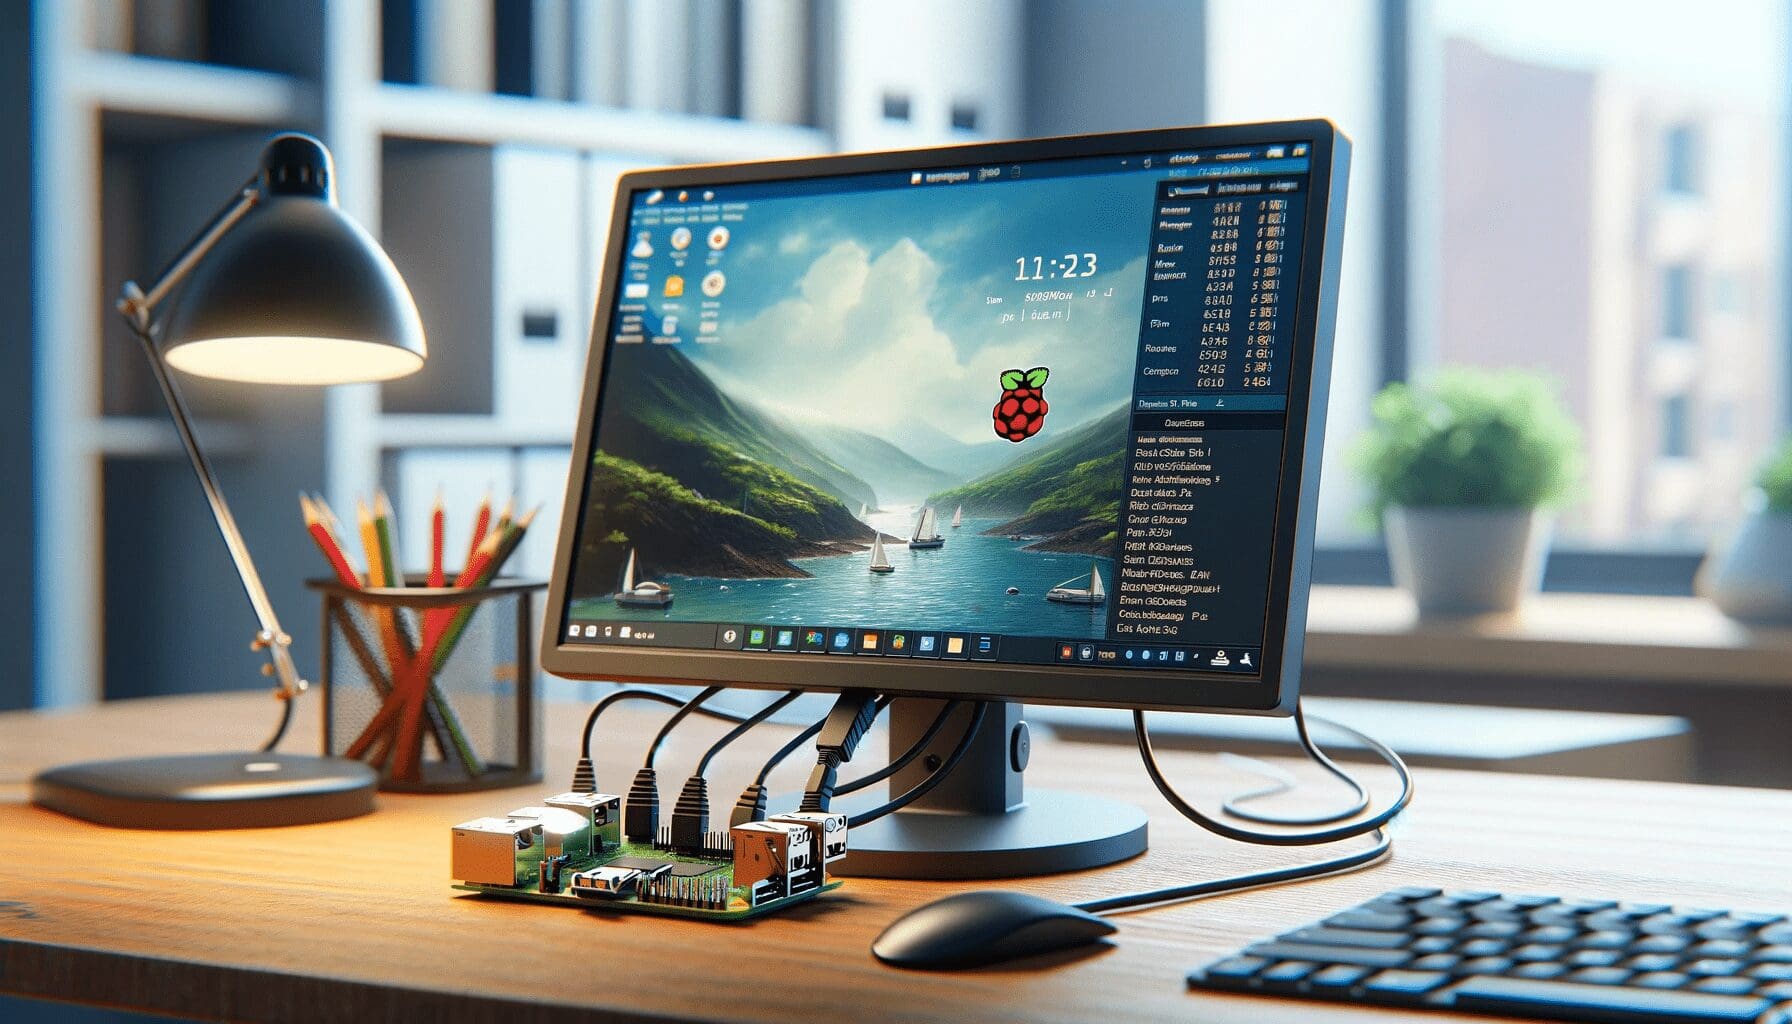 A monitor connected to a Raspberry Pi